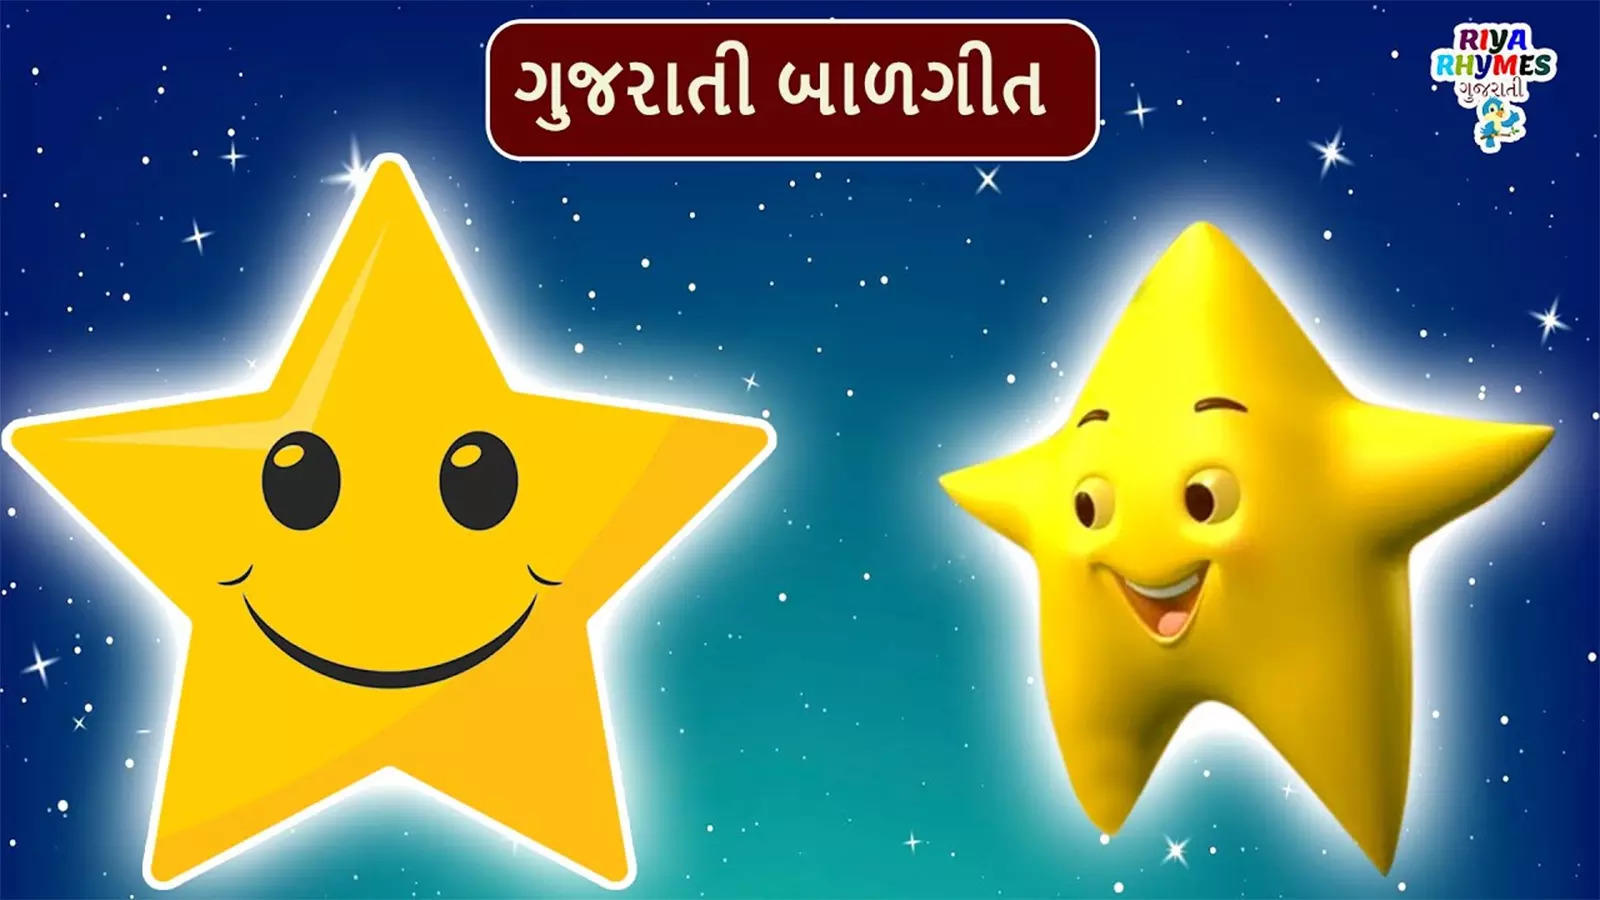 Popular Kids Songs And Gujarati Nursery Rhyme Tum Tum Karta Tara For Kids Check Out Children S Nursery Rhymes Baby Songs Fairy Tales And Many More In Gujarati Entertainment Times